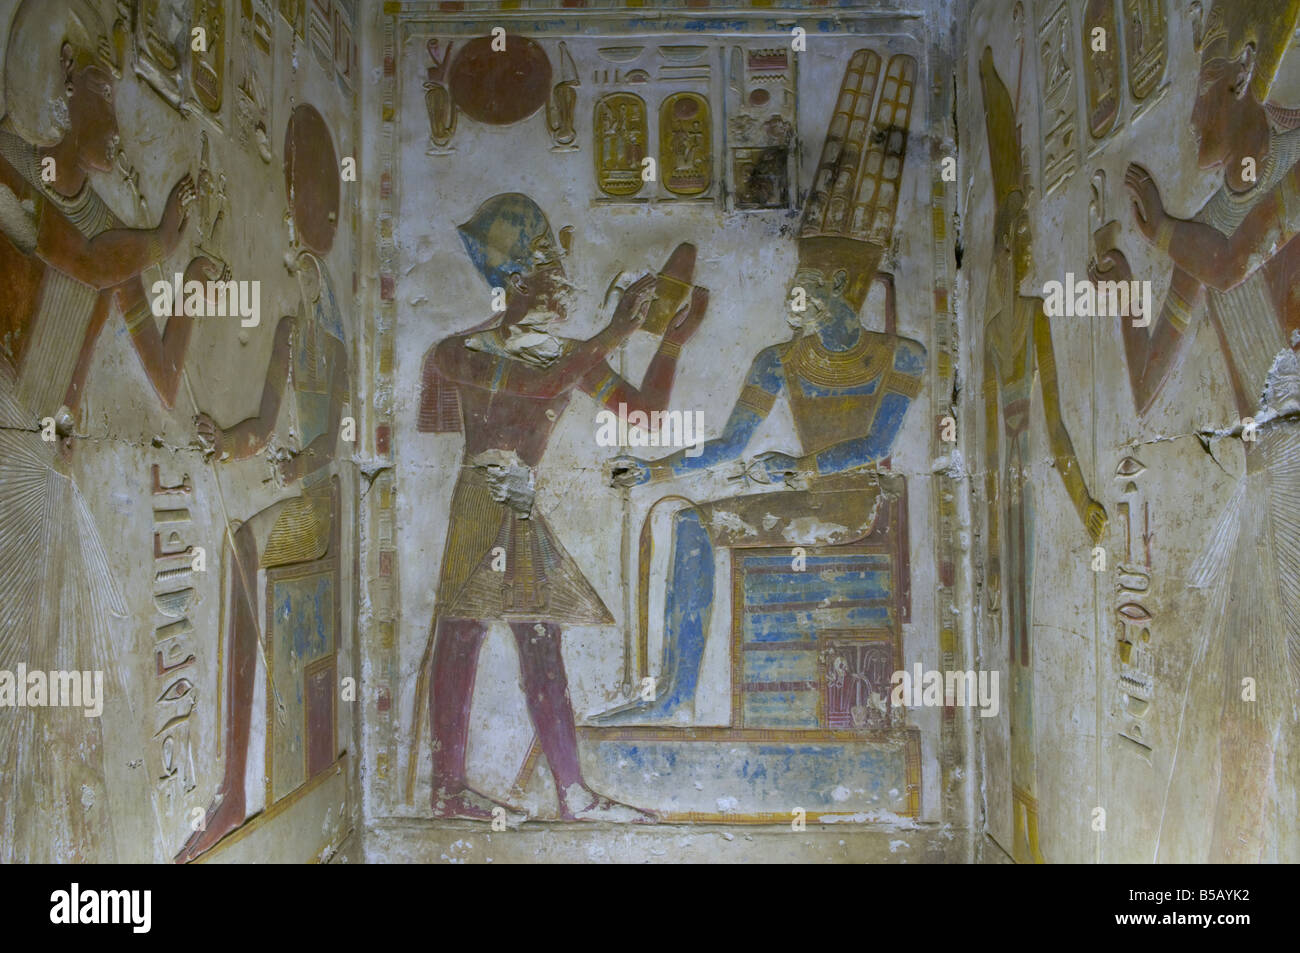 Panel from the Osiris temple: Horus presents royal regalia to a worshiping pharaoh in Abydos one of the oldest cities of ancient Egypt Stock Photo